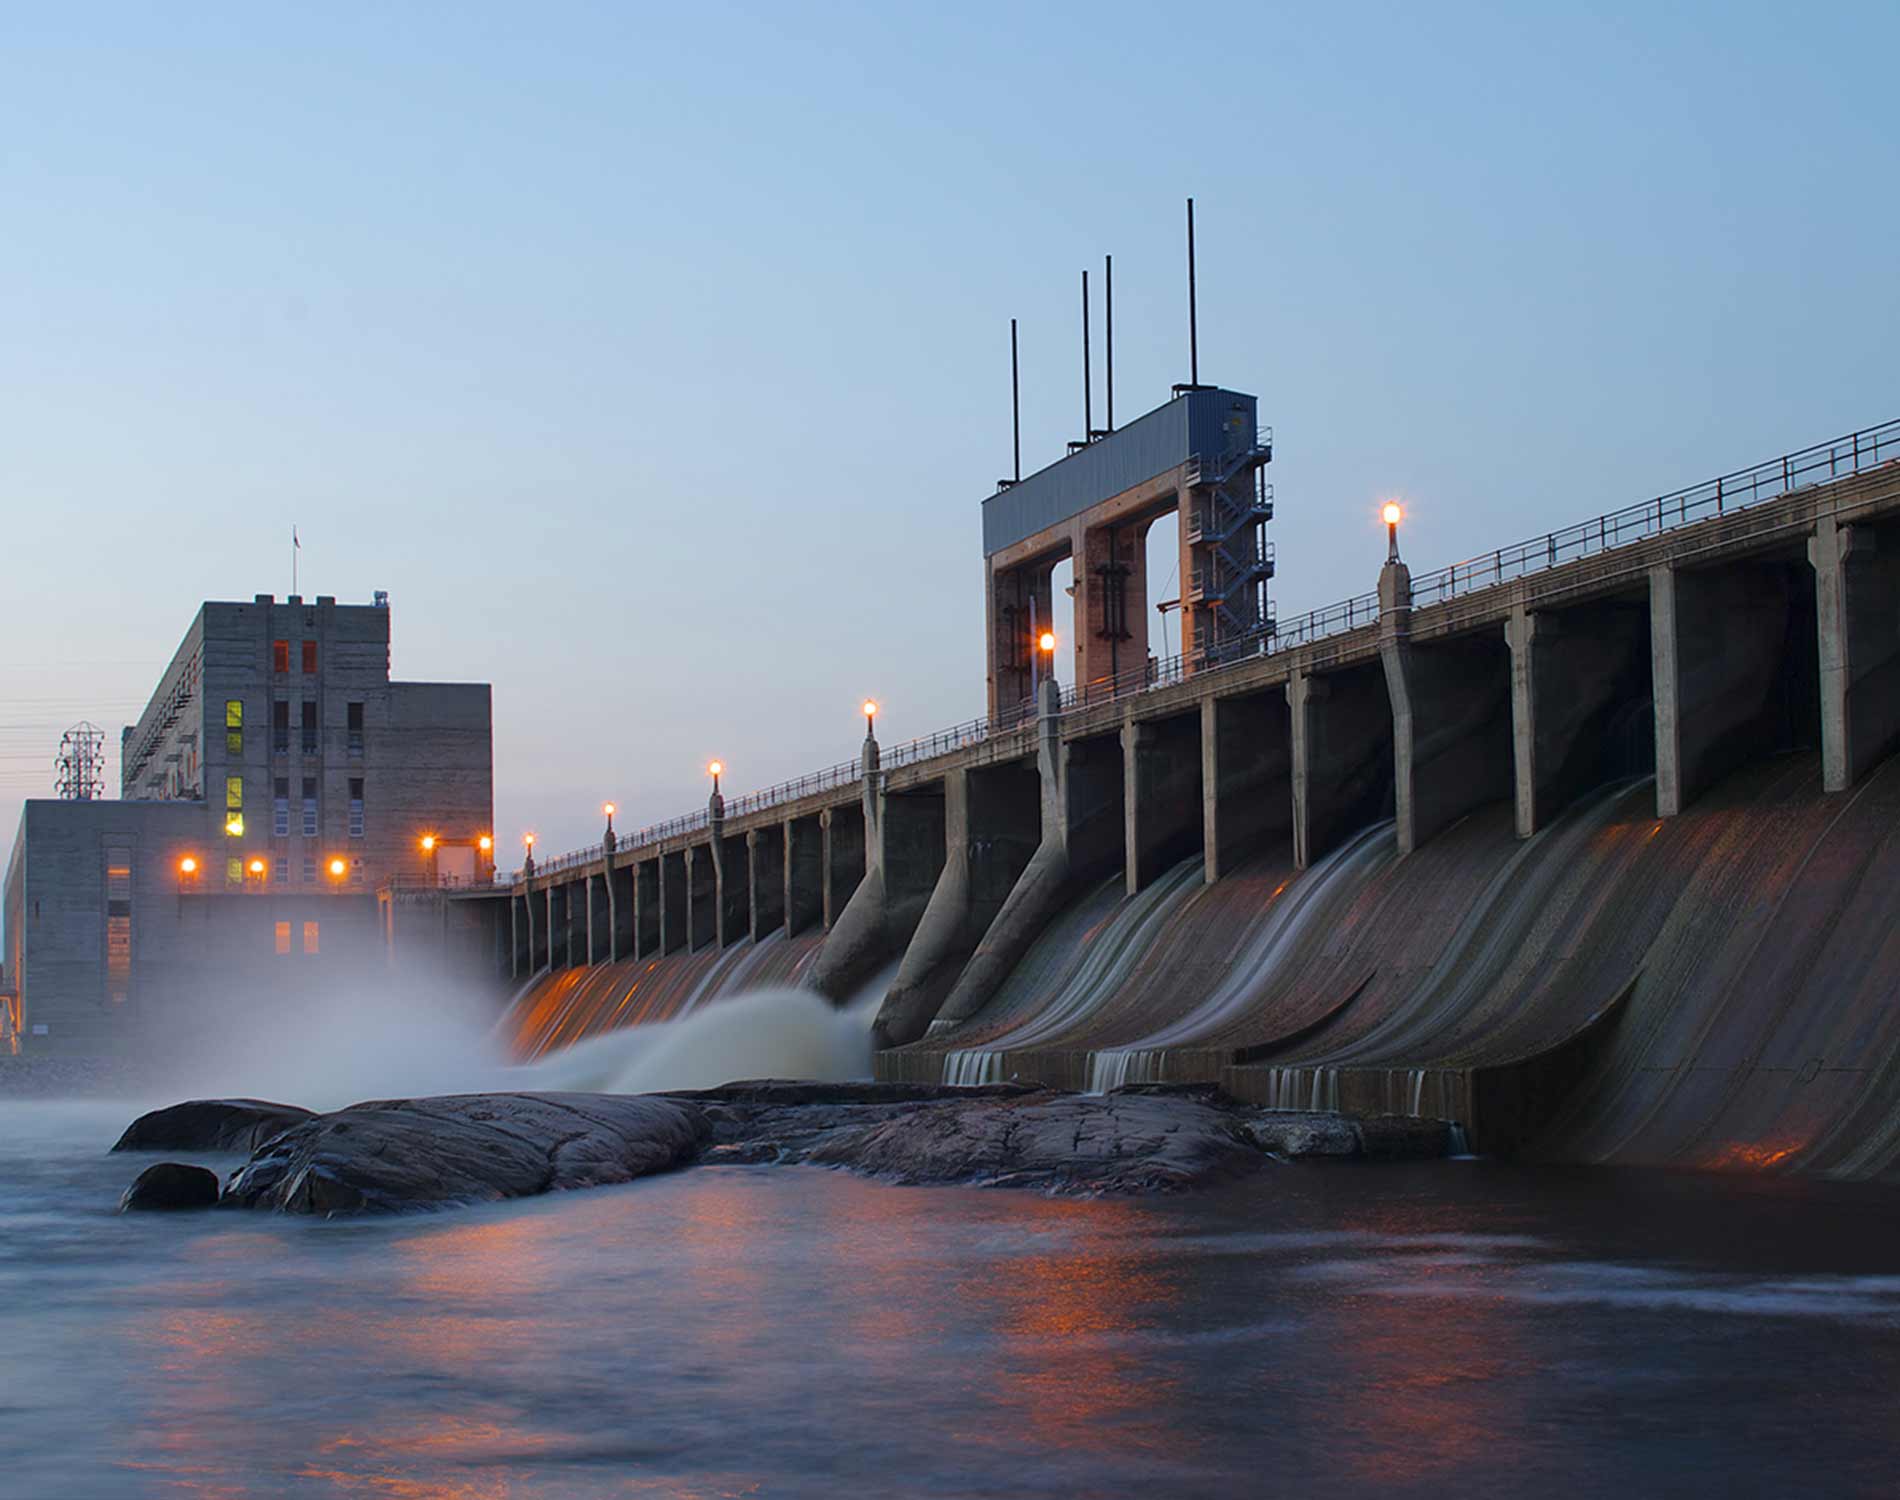 Landscape of a hydroelectric dam at dusk